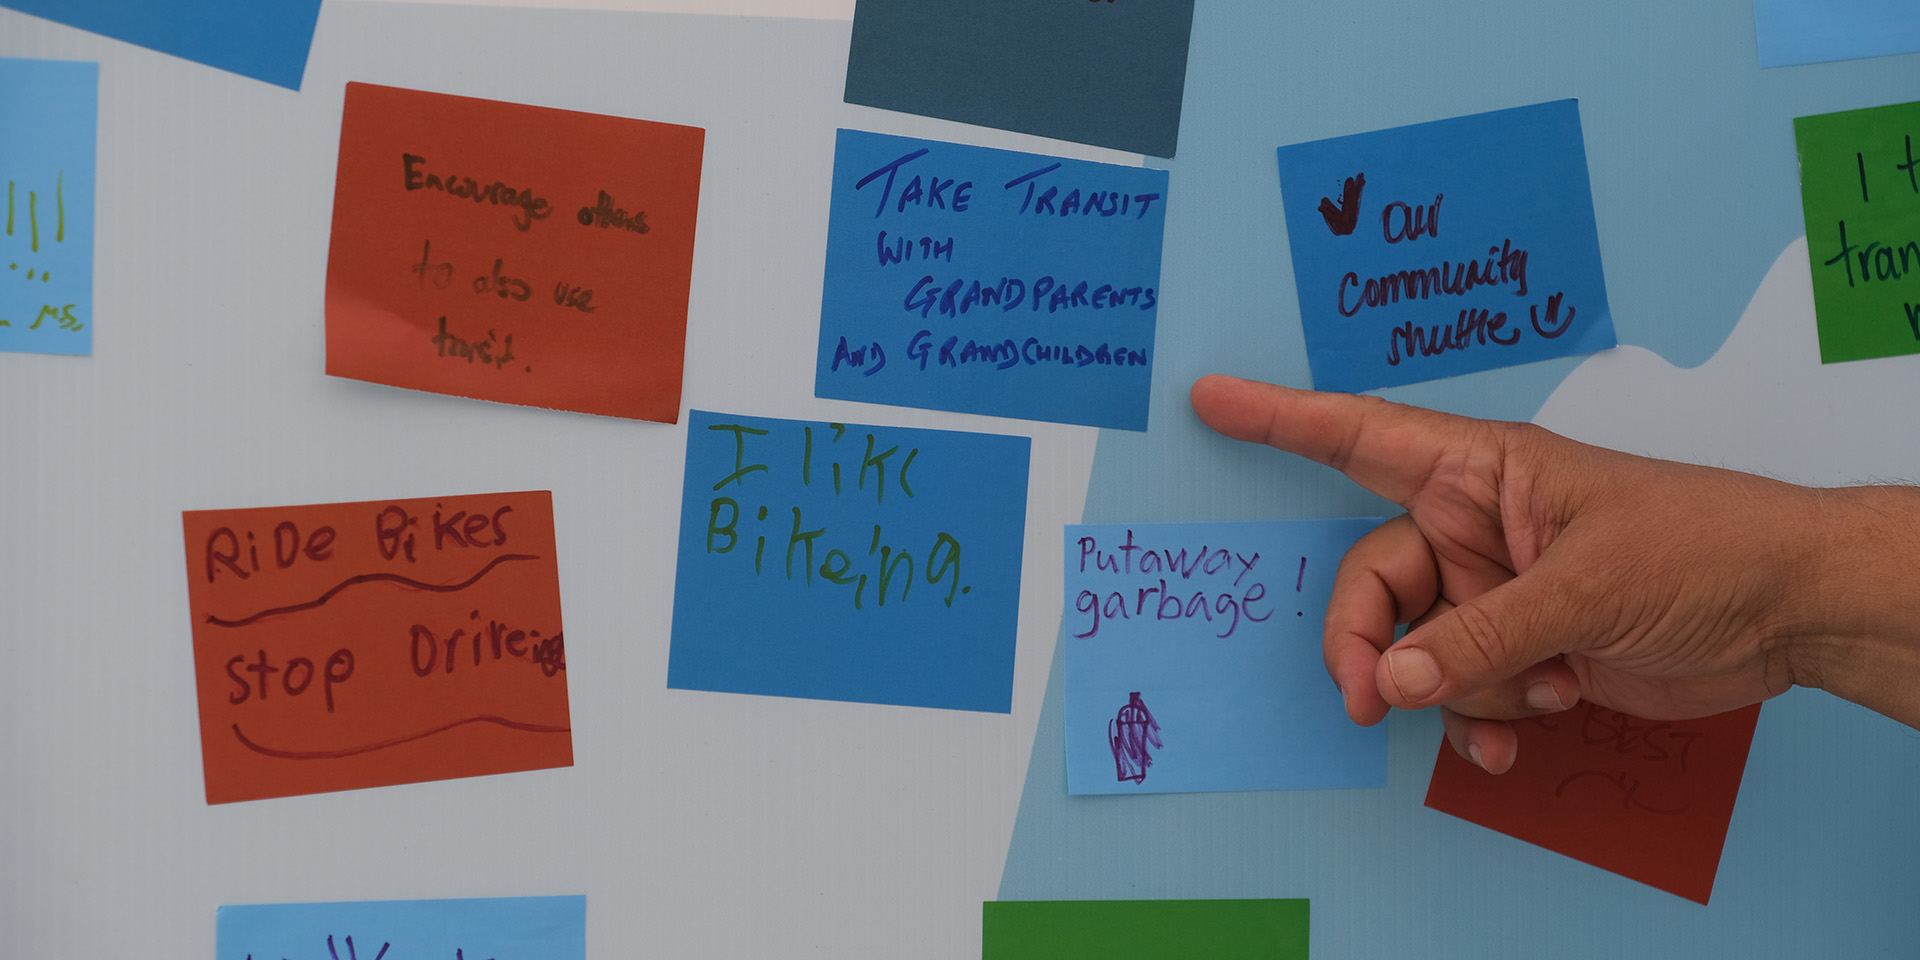 A stick note saying "Take transit with grandparents and grandchildren" on the pledge wall